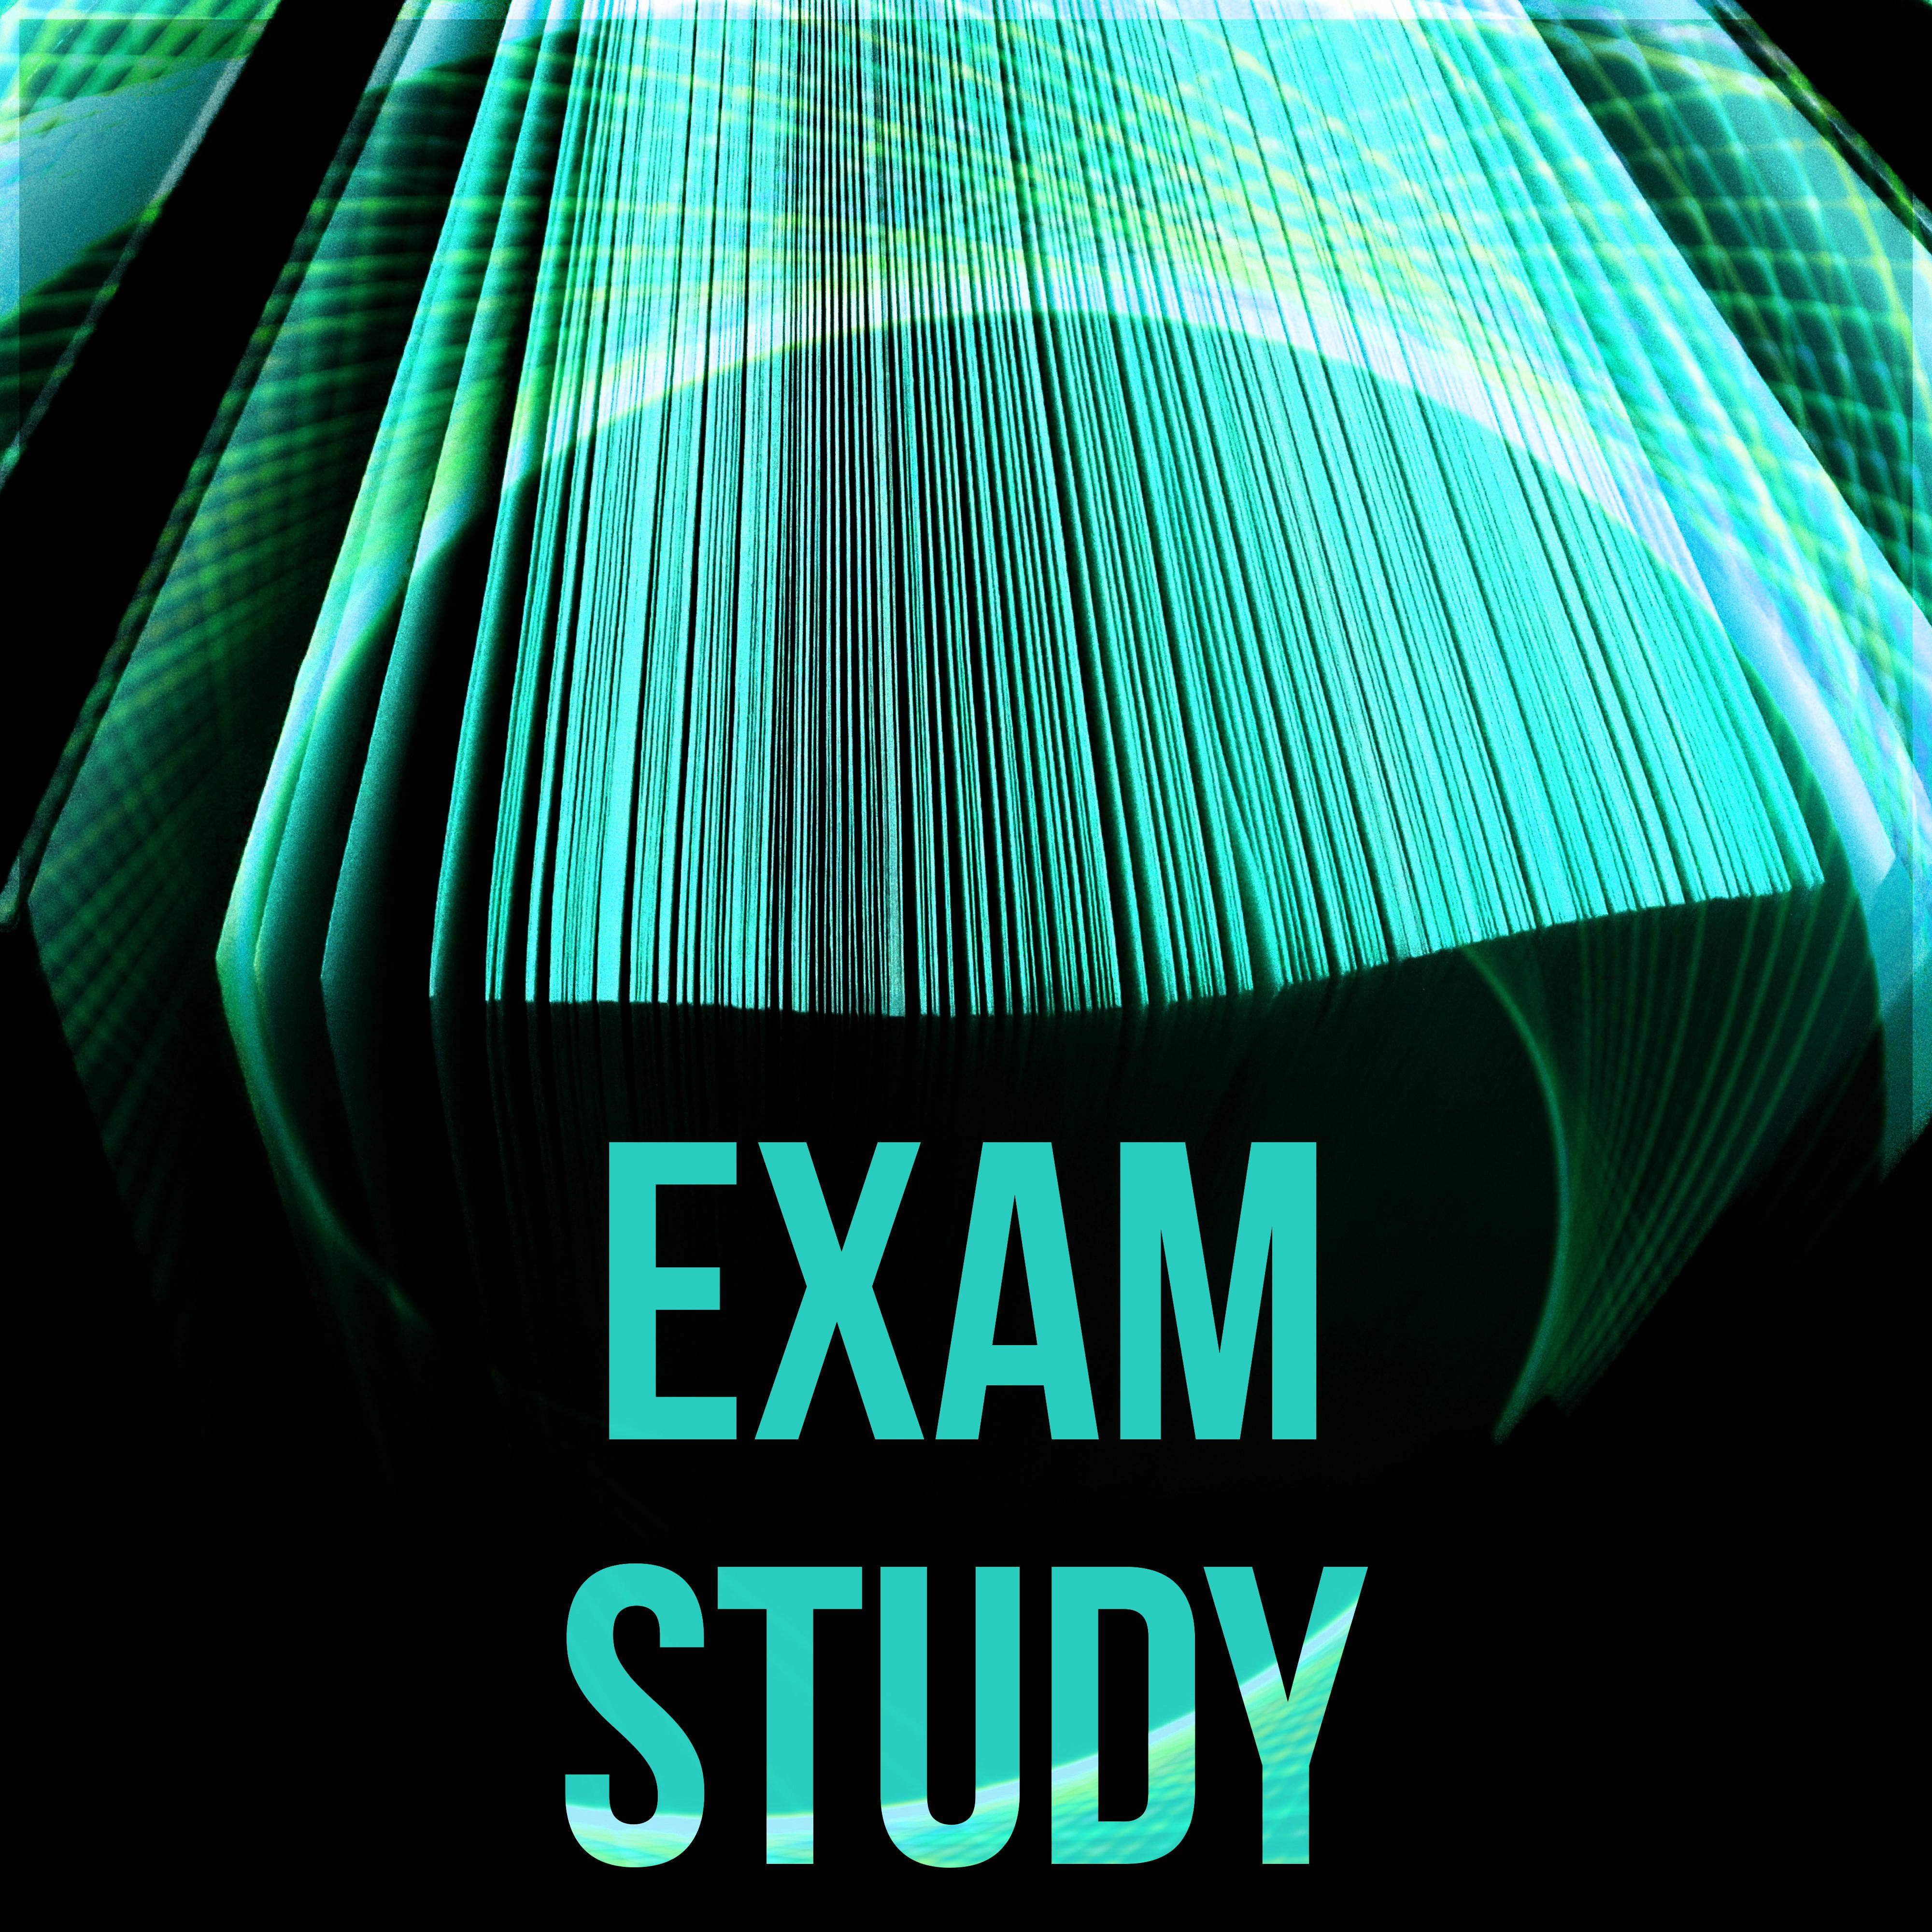 Exam Study  Background Music for Learning, Study Skills, Brain Exercises, Increase Concentration, Improve Memory, Nature Sounds, Peace of Mind, Creative Thinking